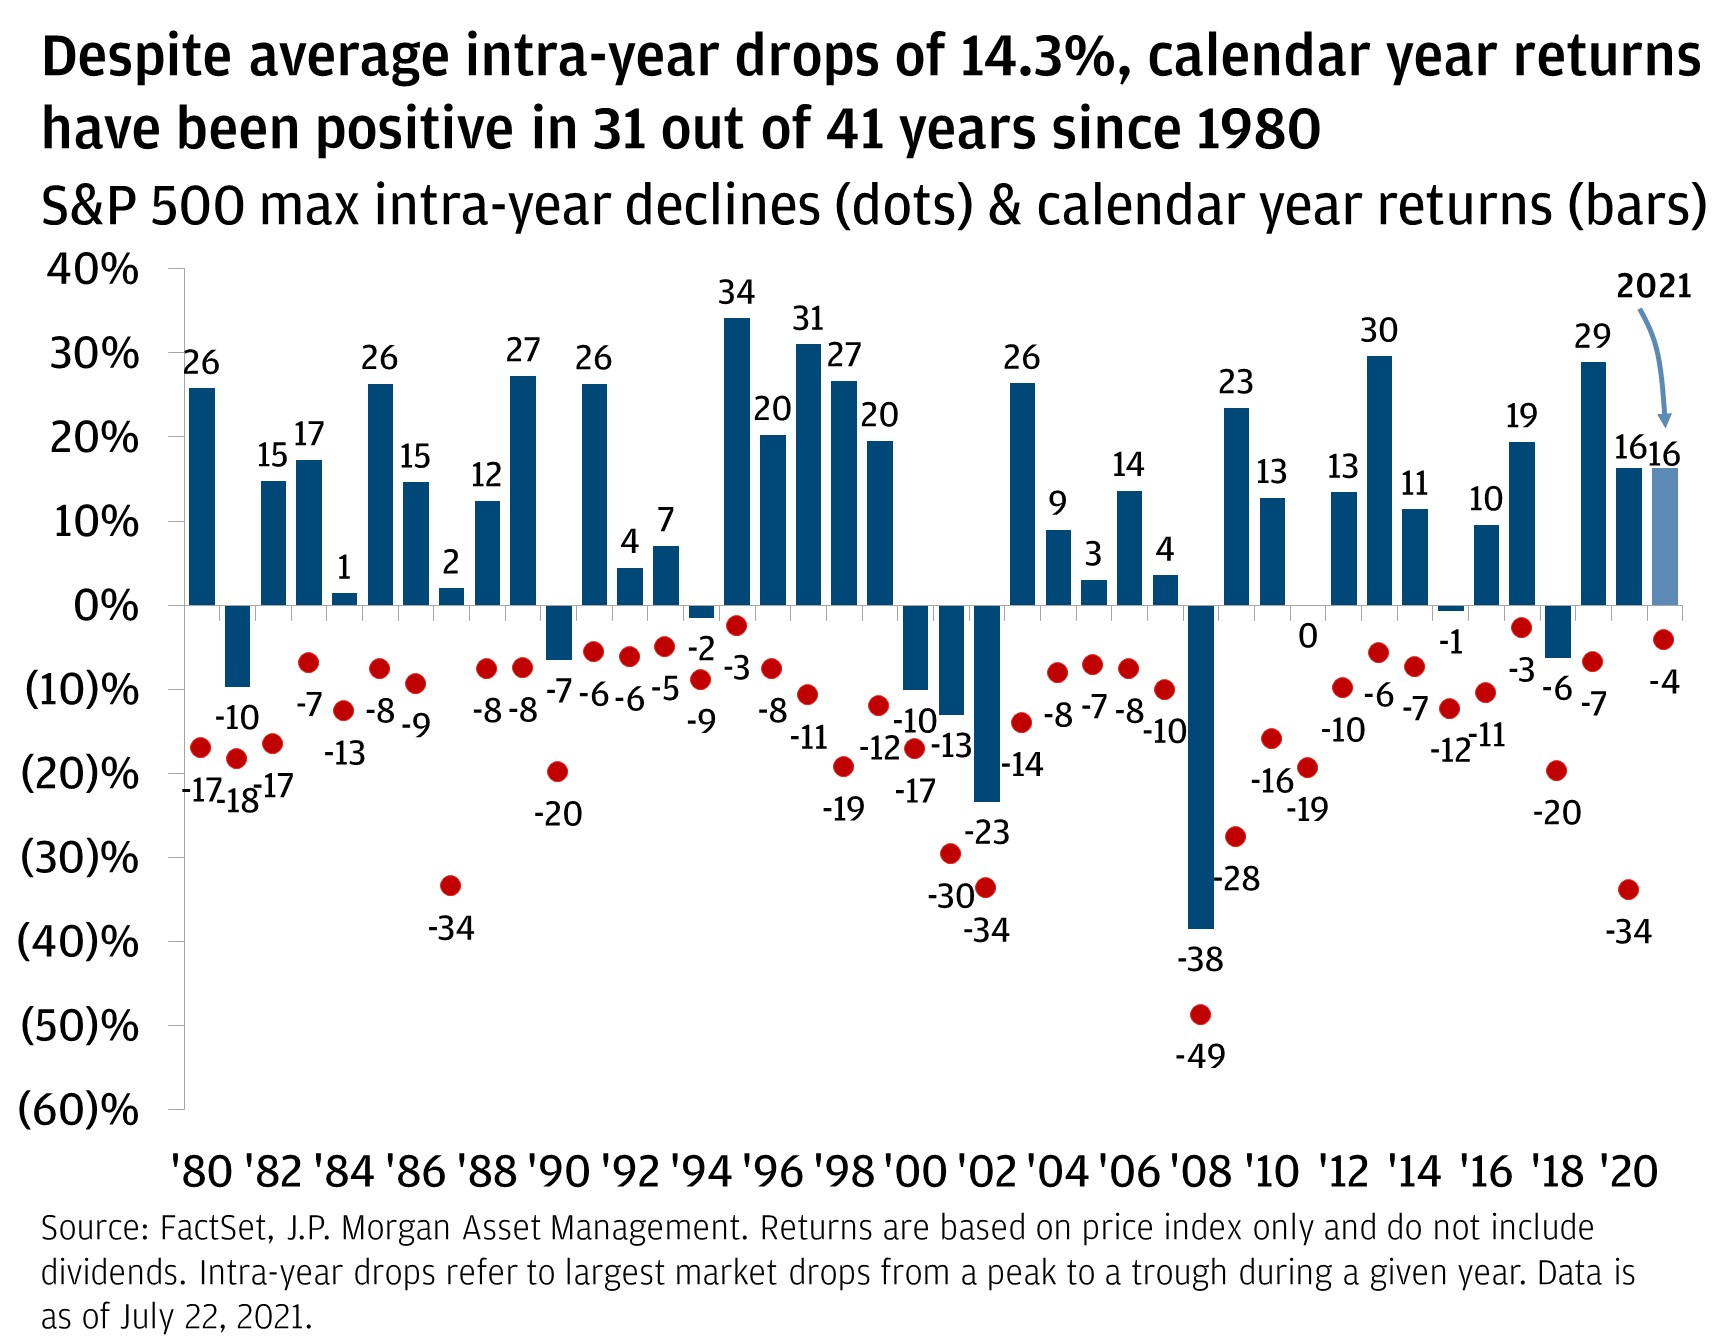 The average intra-year percent drop from 1980 to 2020 was 14.3%, while the calendar year returns were above zero (positive) in 31 of the 41 years observed in the data. The maximum intra-year decline and calendar year both occurred in 2008, with a 49% intra-year decline in 2008 and with a calendar year return of -38%. So far, 2021 has seen an intra-year decline of -4%, with the year-to-date calendar year return standing at 16%.